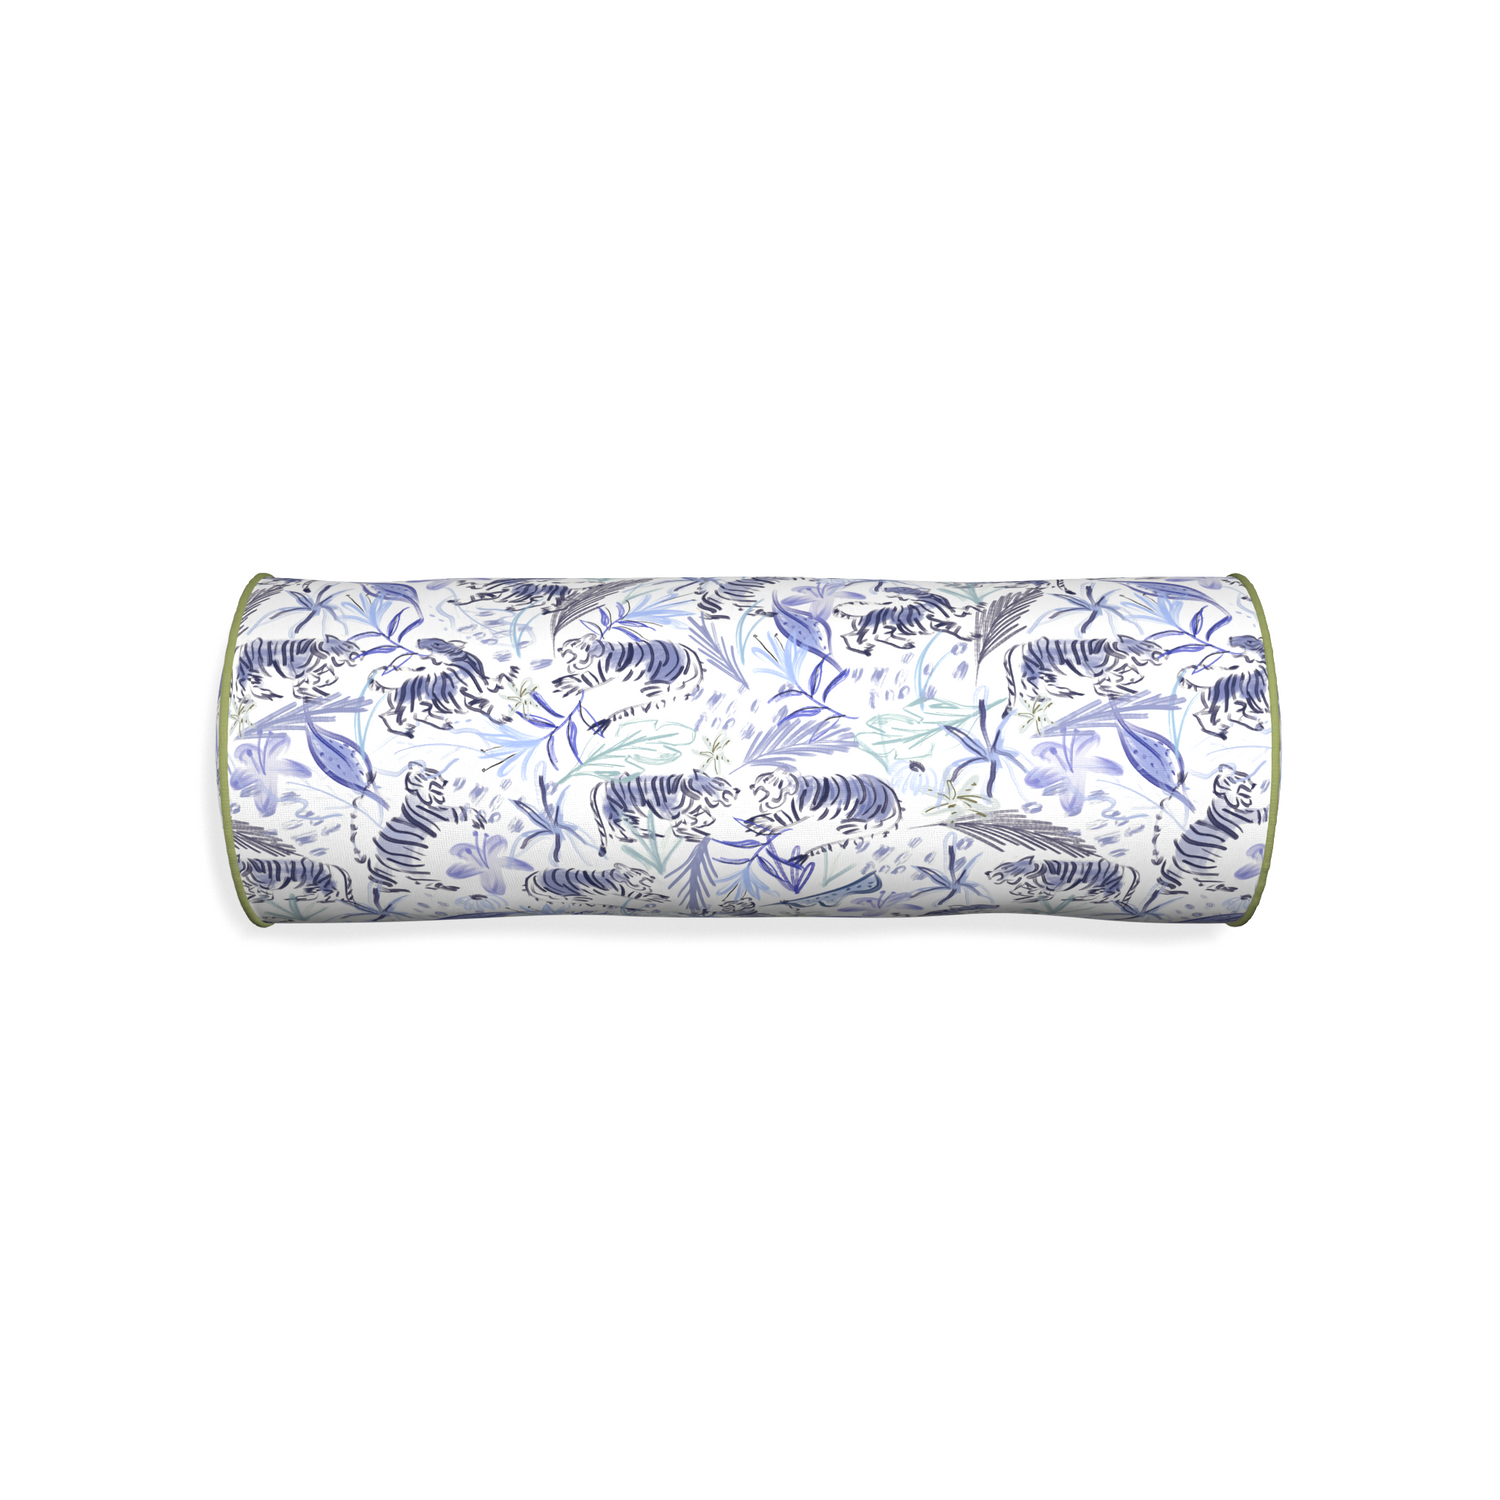 Bolster frida blue custom blue with intricate tiger designpillow with moss piping on white background